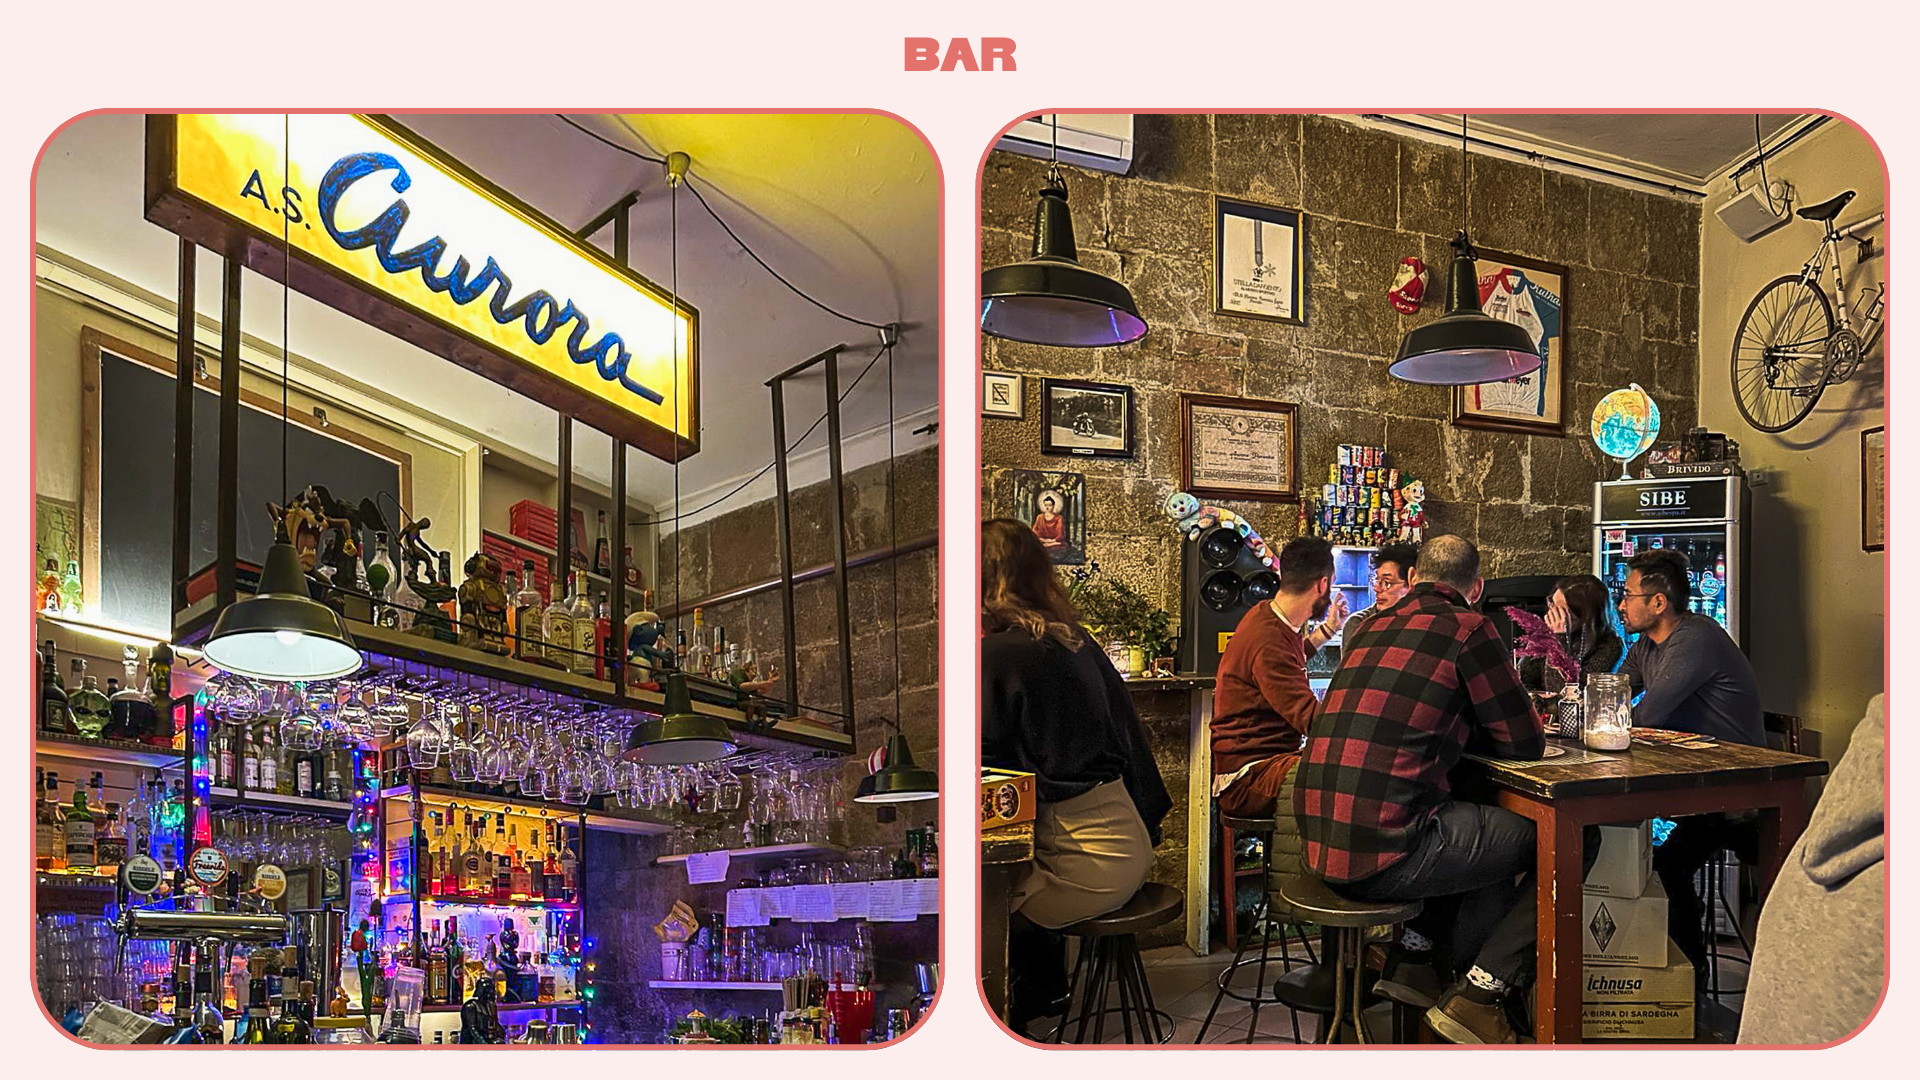 Interiors of an Italian late-night bar with neon signs, bikes hanging from walls and customers chatting over drinks